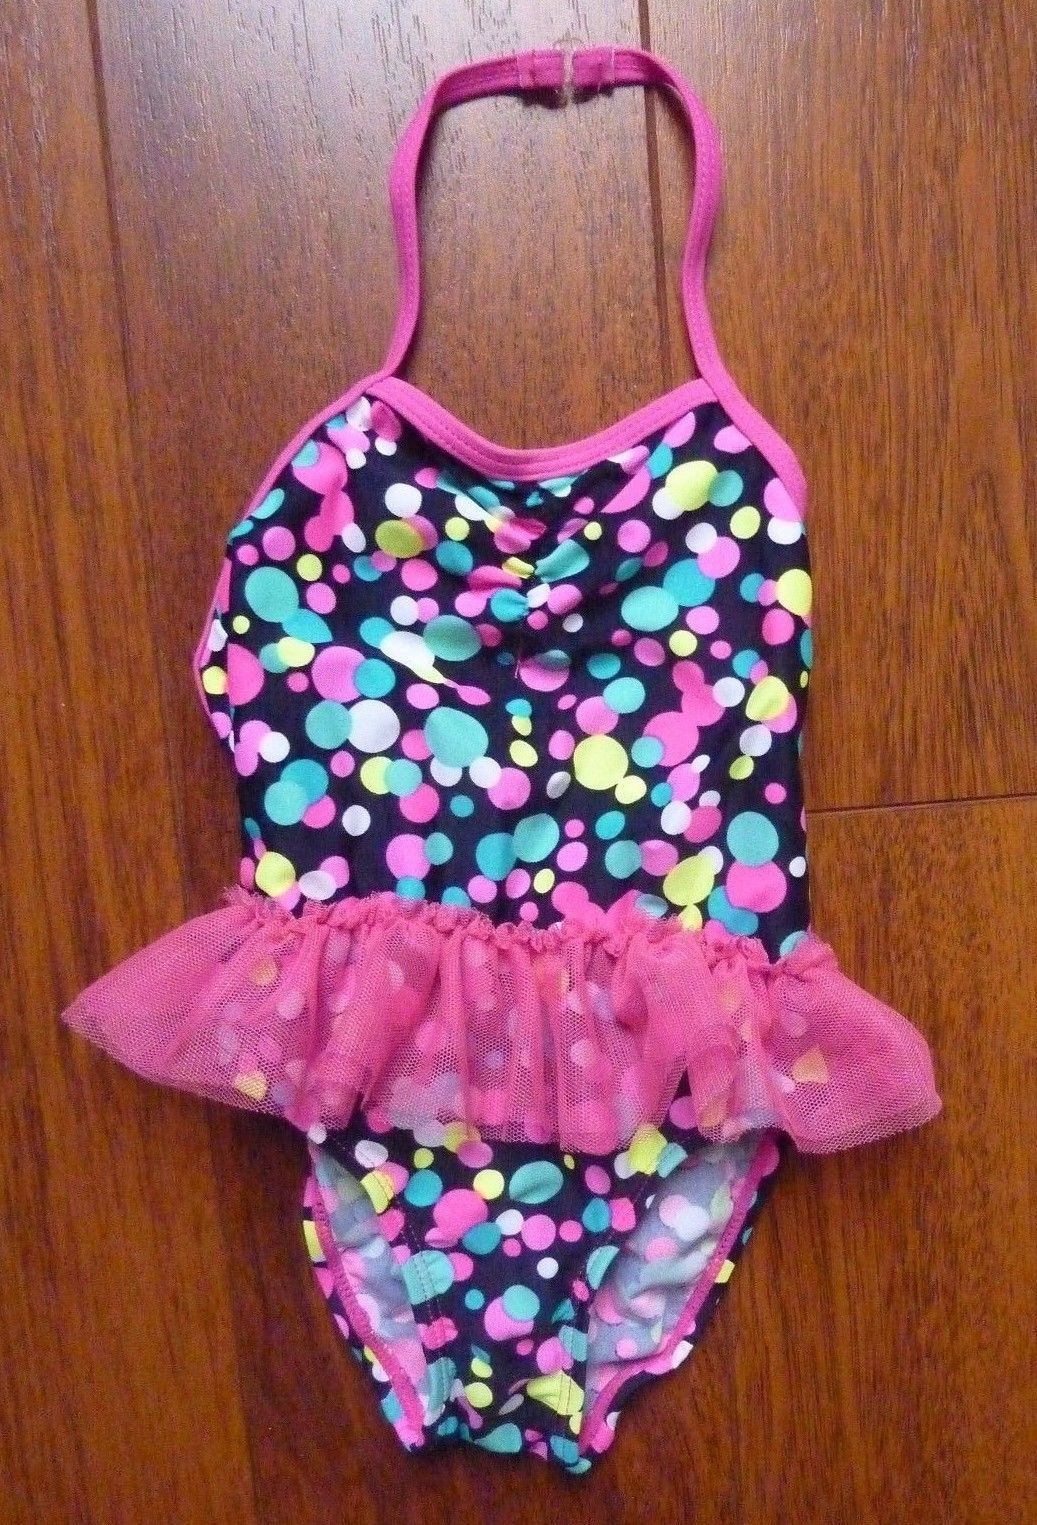 Childrens Place girls size 12-18 months Pink ruffle bathing suit Polka Dots NEW - $12.69